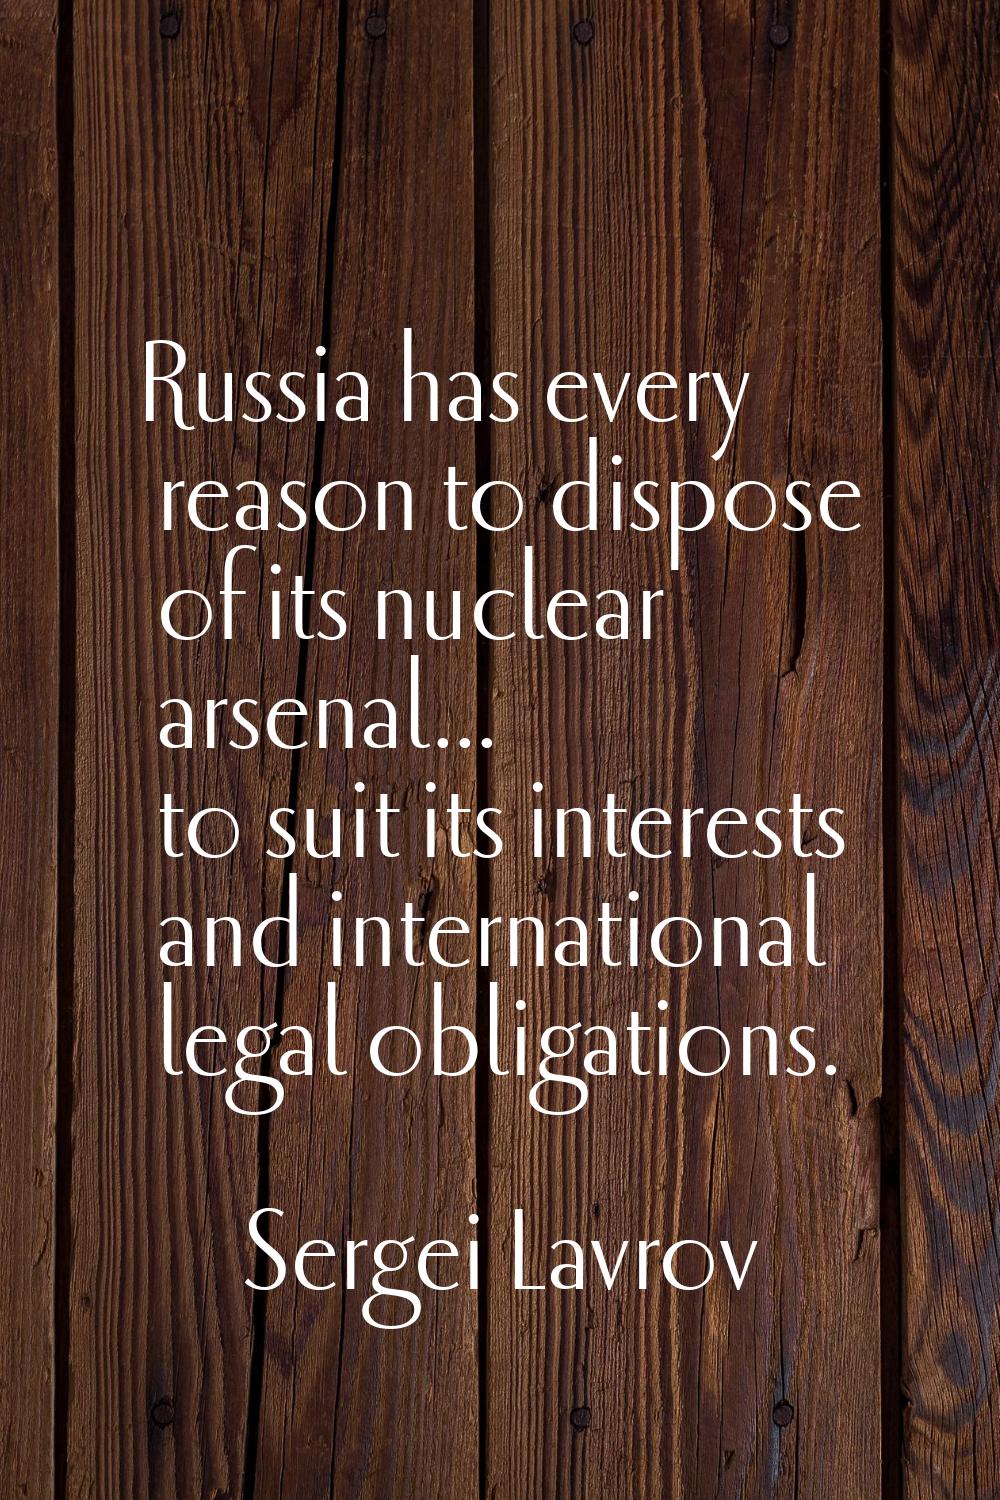 Russia has every reason to dispose of its nuclear arsenal... to suit its interests and internationa